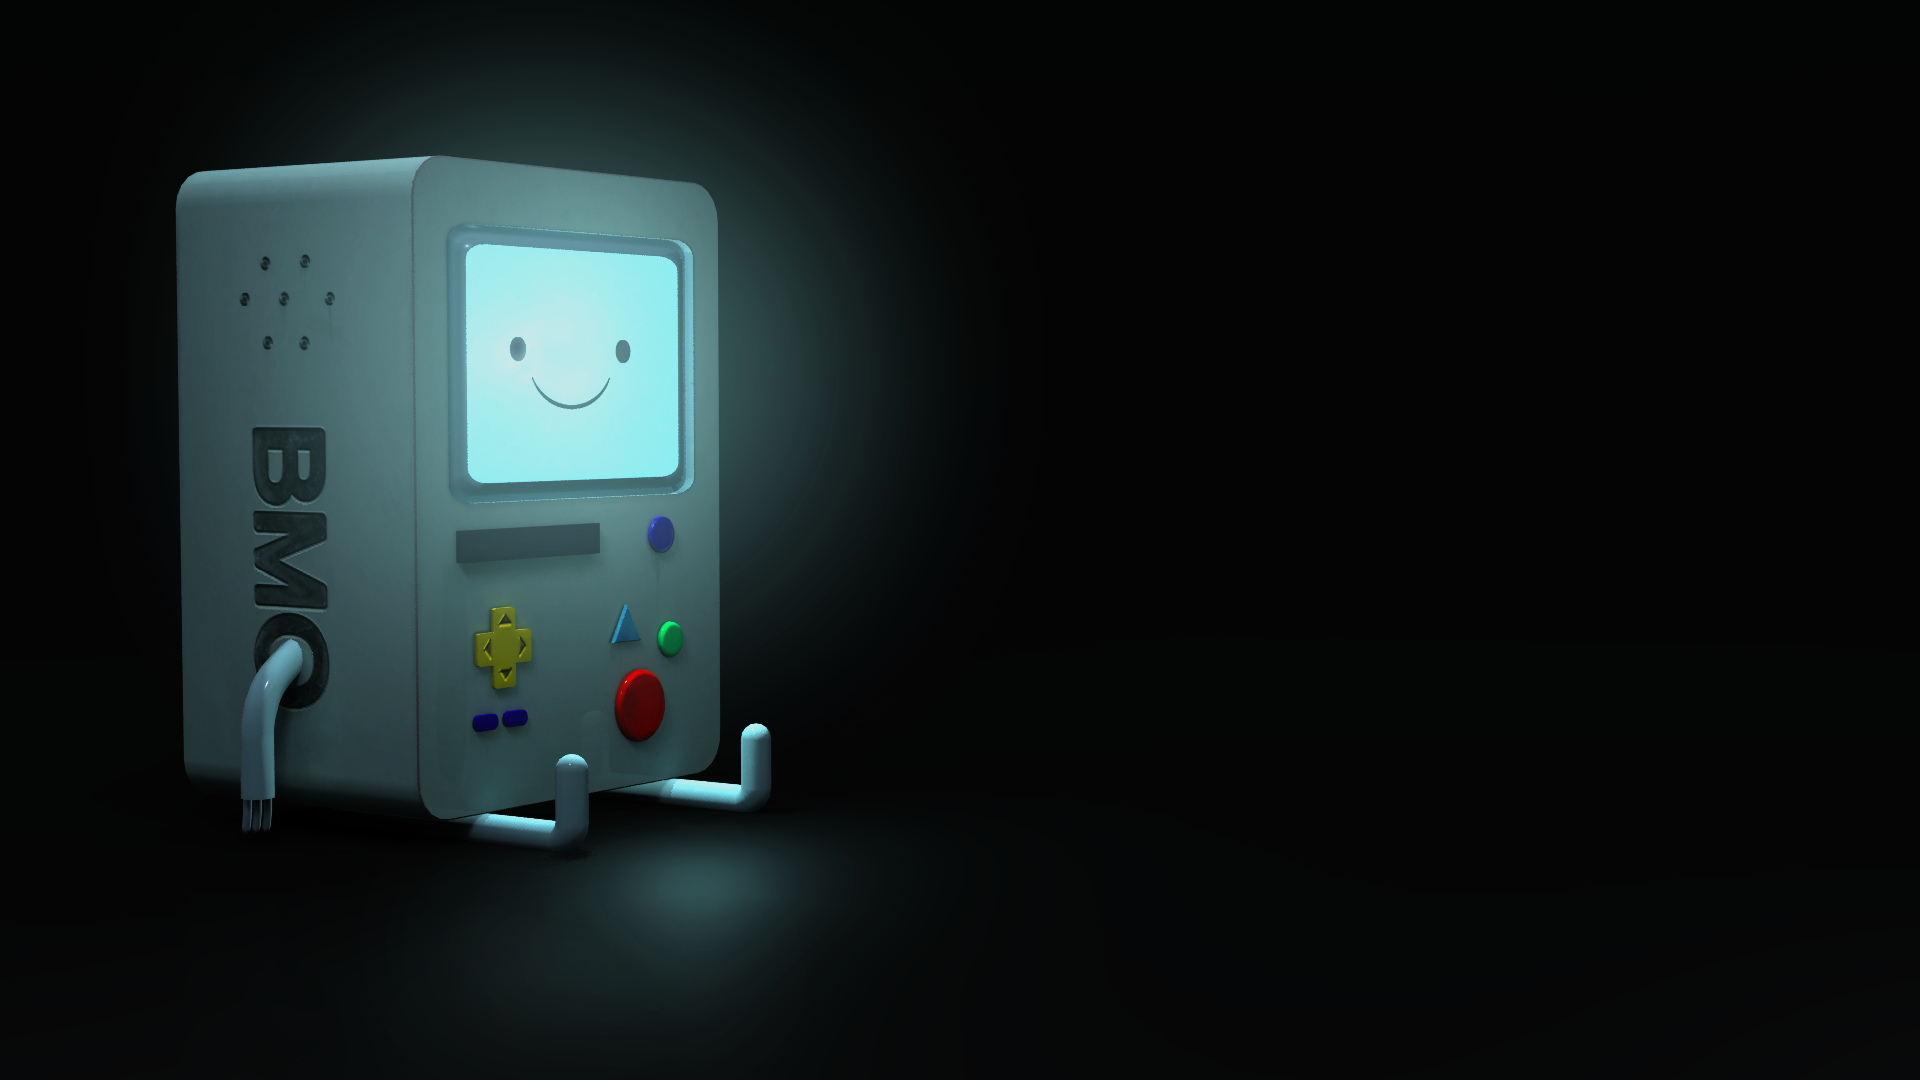 adventure time live wallpaper,light,product,technology,electronics,electronic device